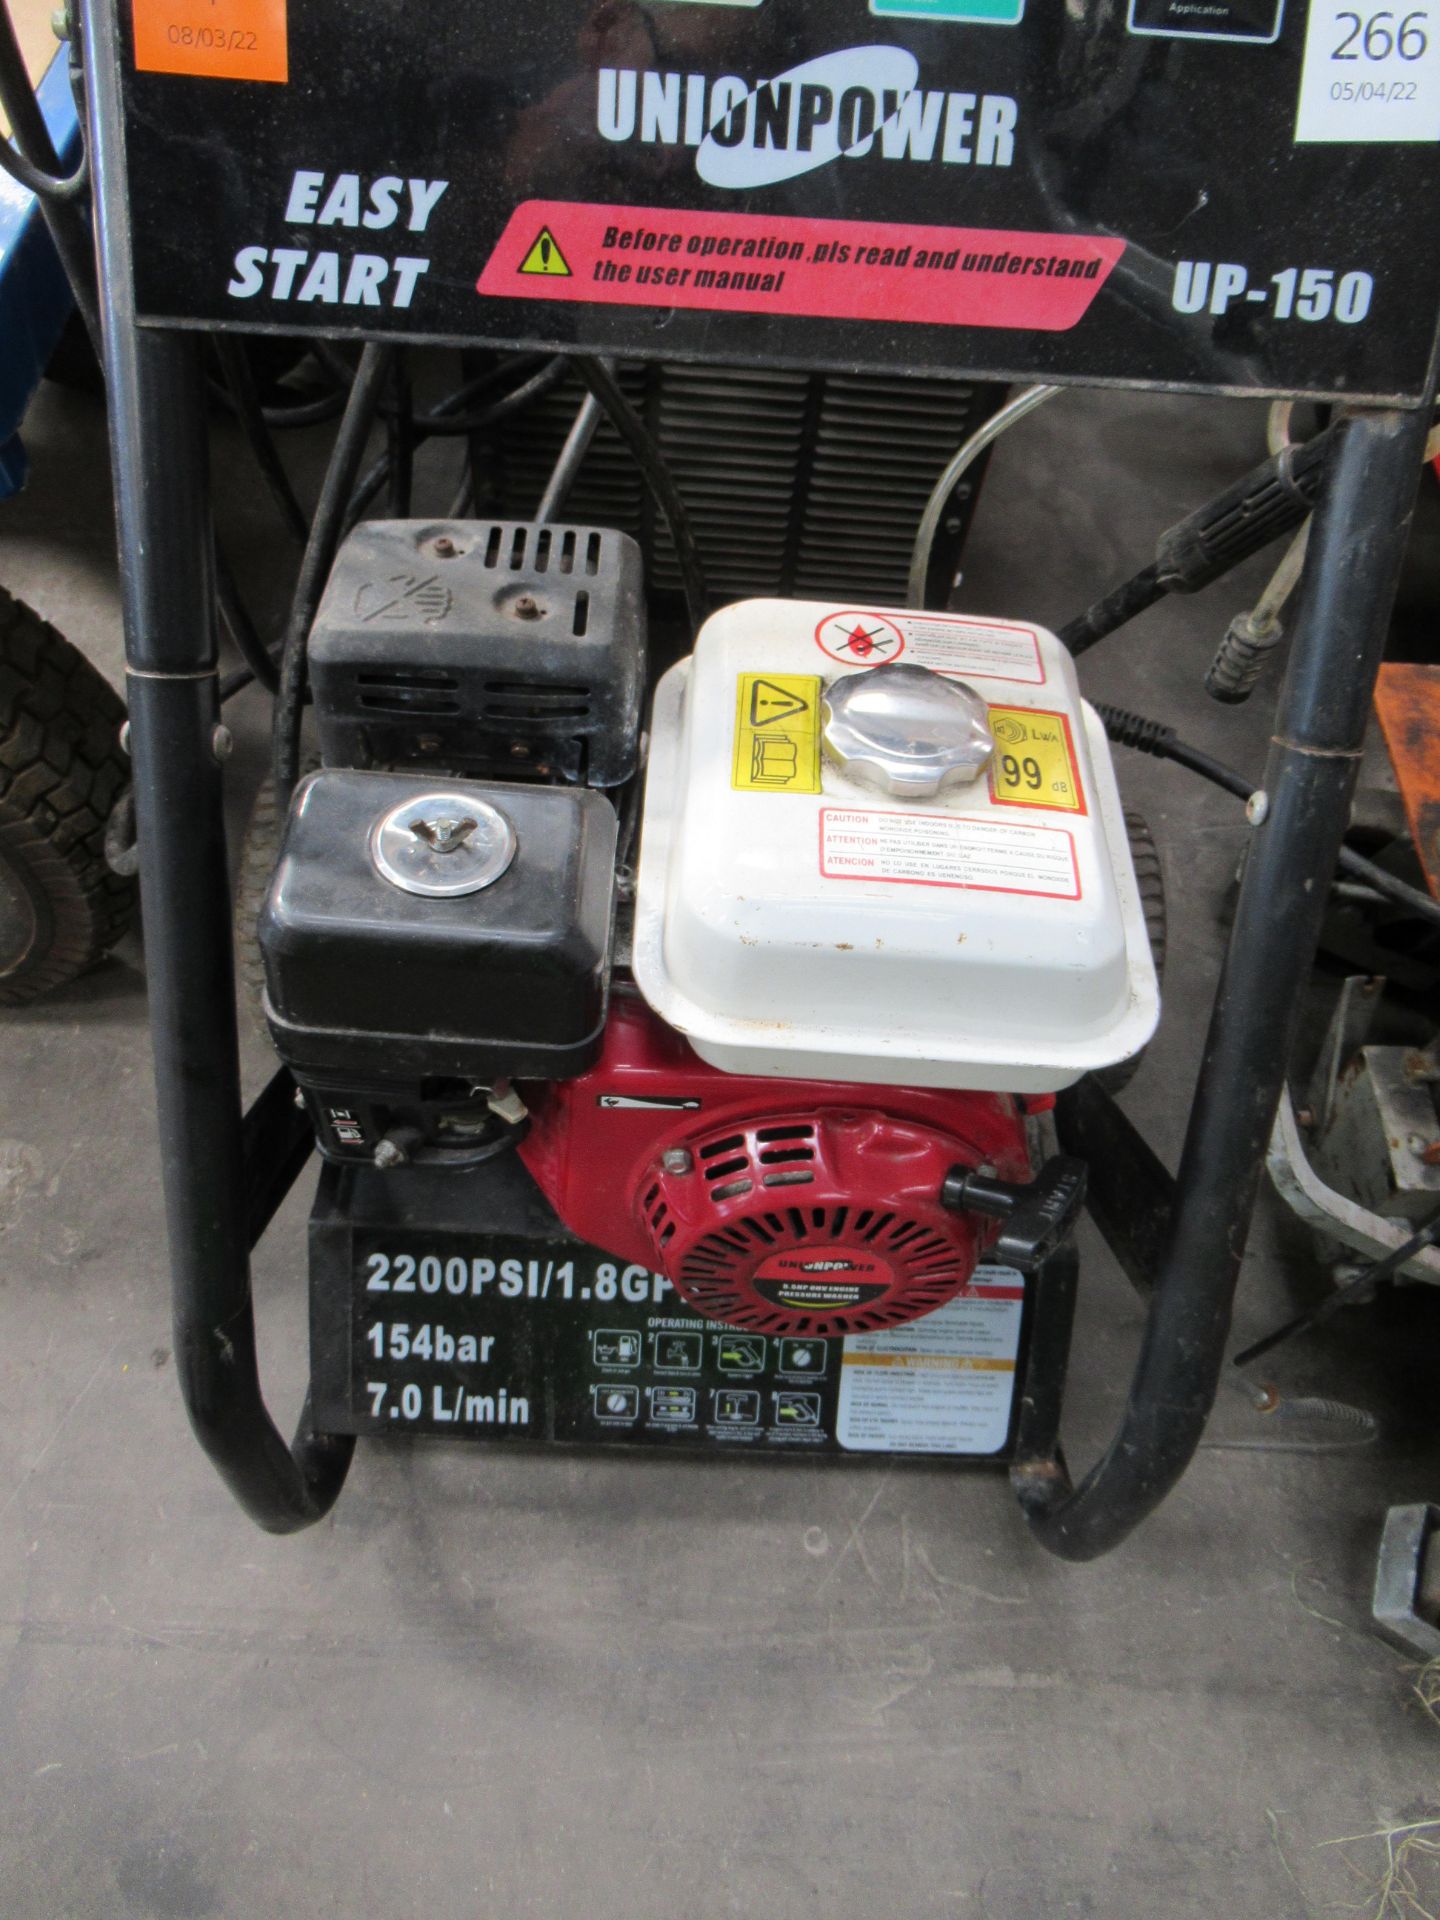 Union power UP-150 petrol powered pressure washer - Image 2 of 3